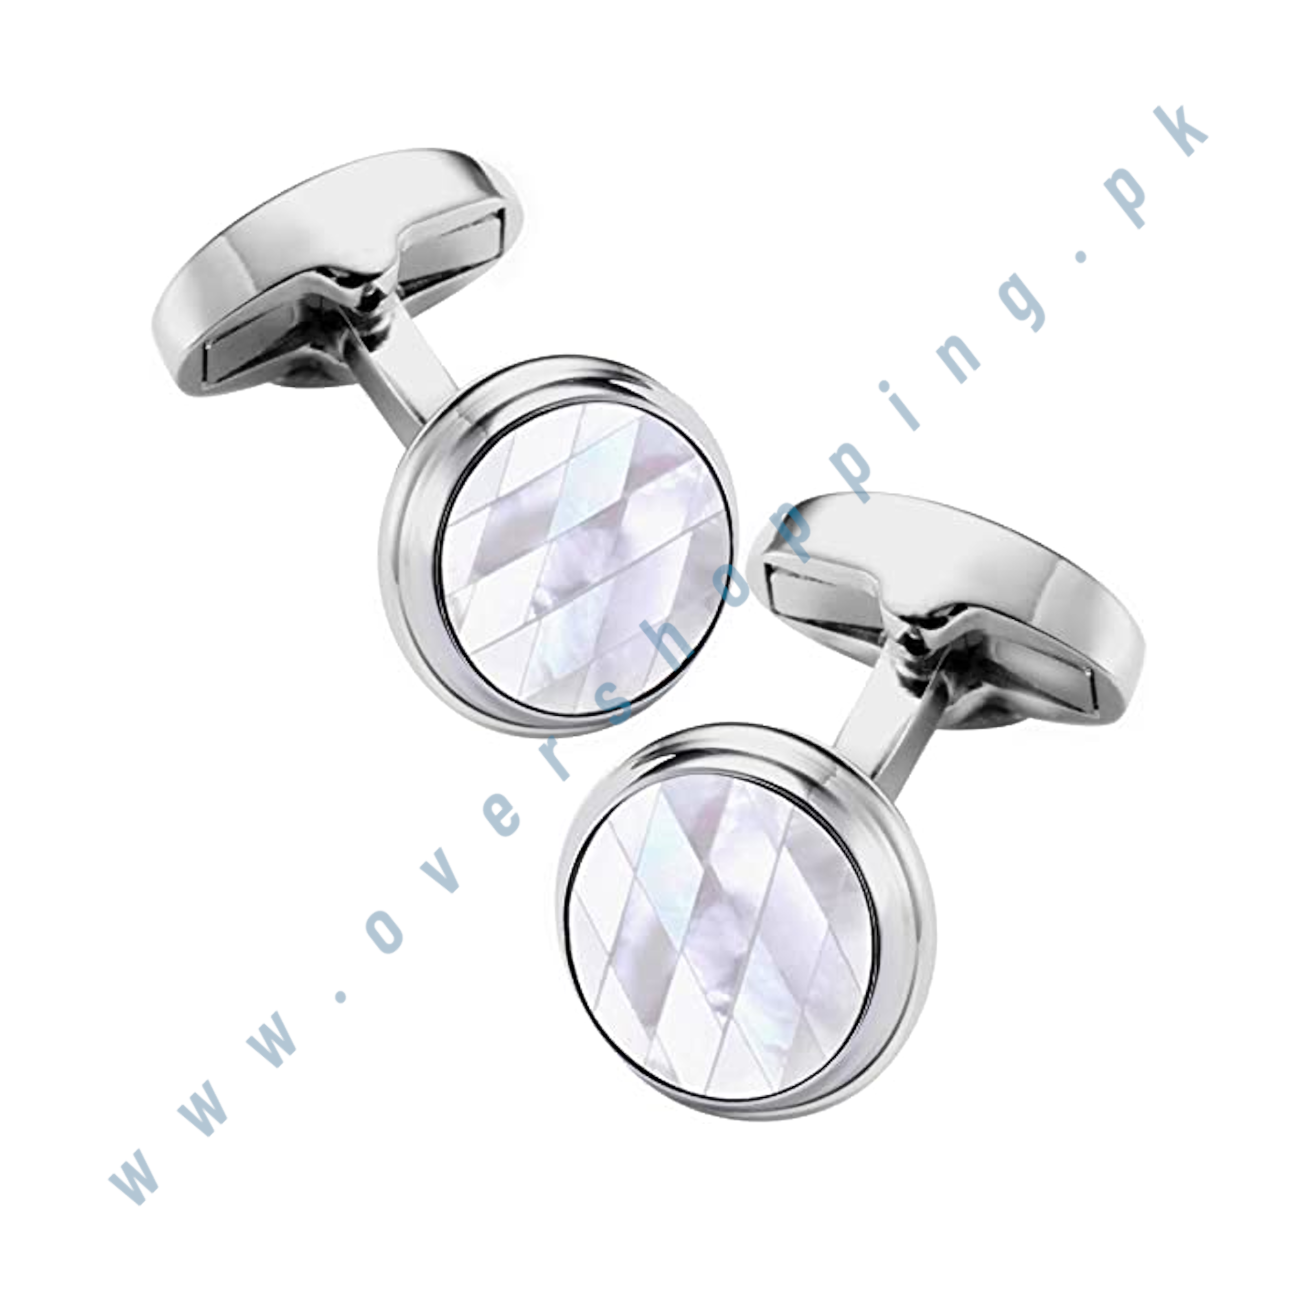 Cufflinks for Men - Personalized Gift Accessory fo